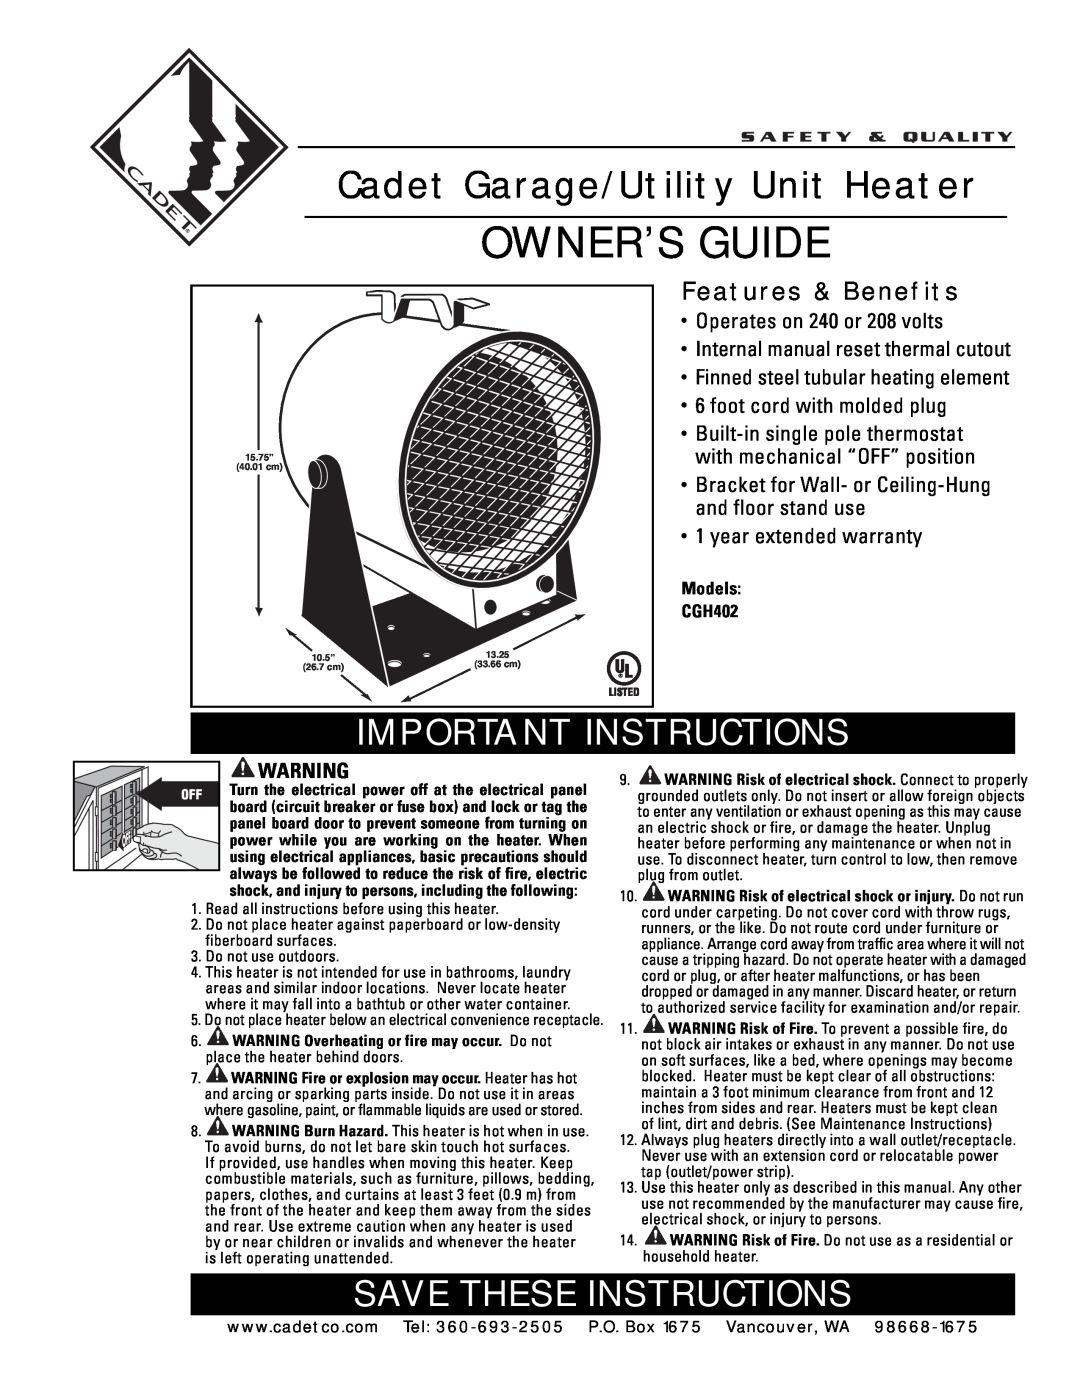 Cadet warranty Cadet Garage/Utility Unit Heater, Important Instructions, Save These Instructions, Models CGH402 